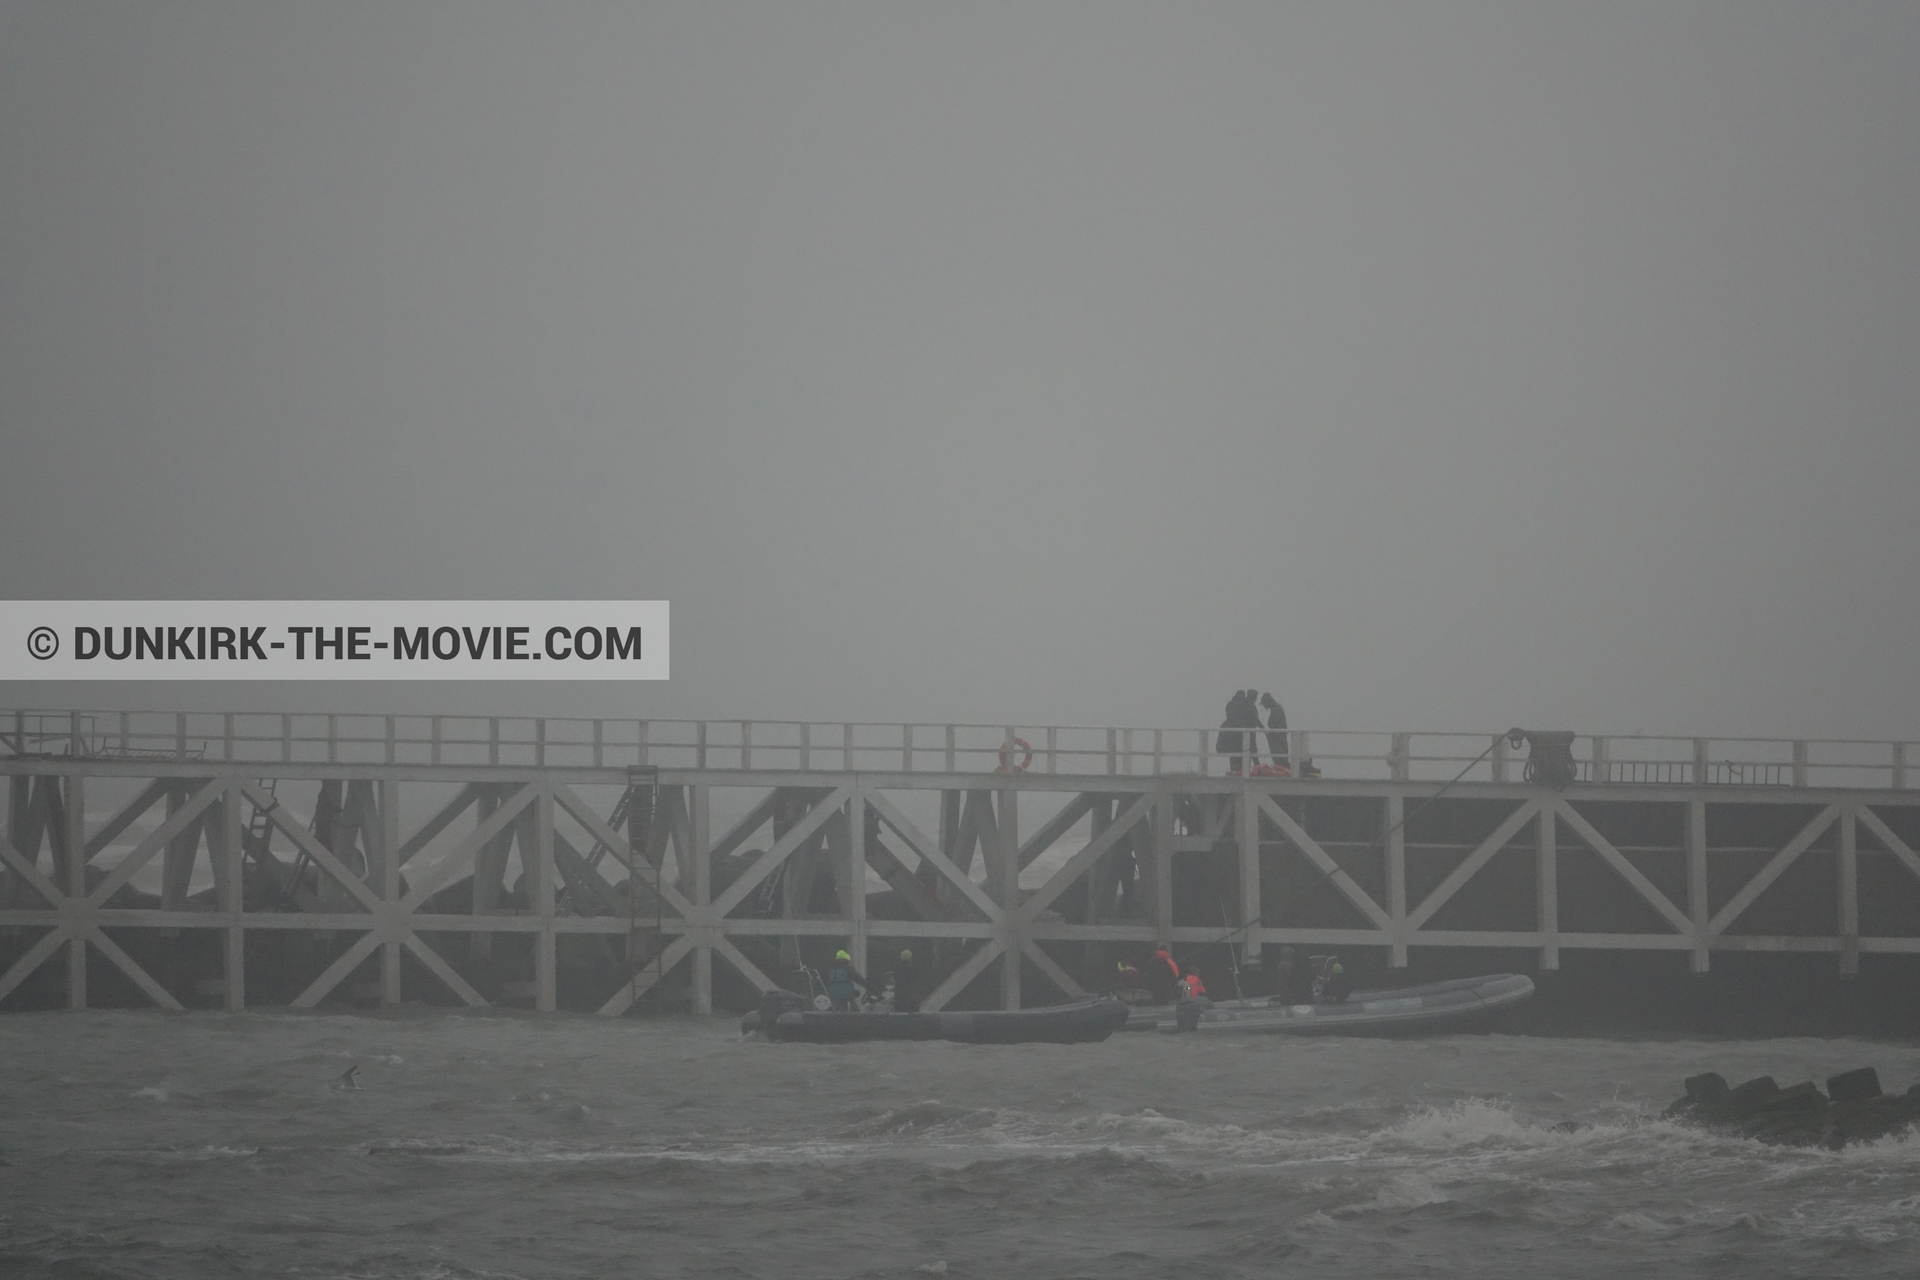 Picture with grey sky, EST pier, rough sea, inflatable dinghy,  from behind the scene of the Dunkirk movie by Nolan